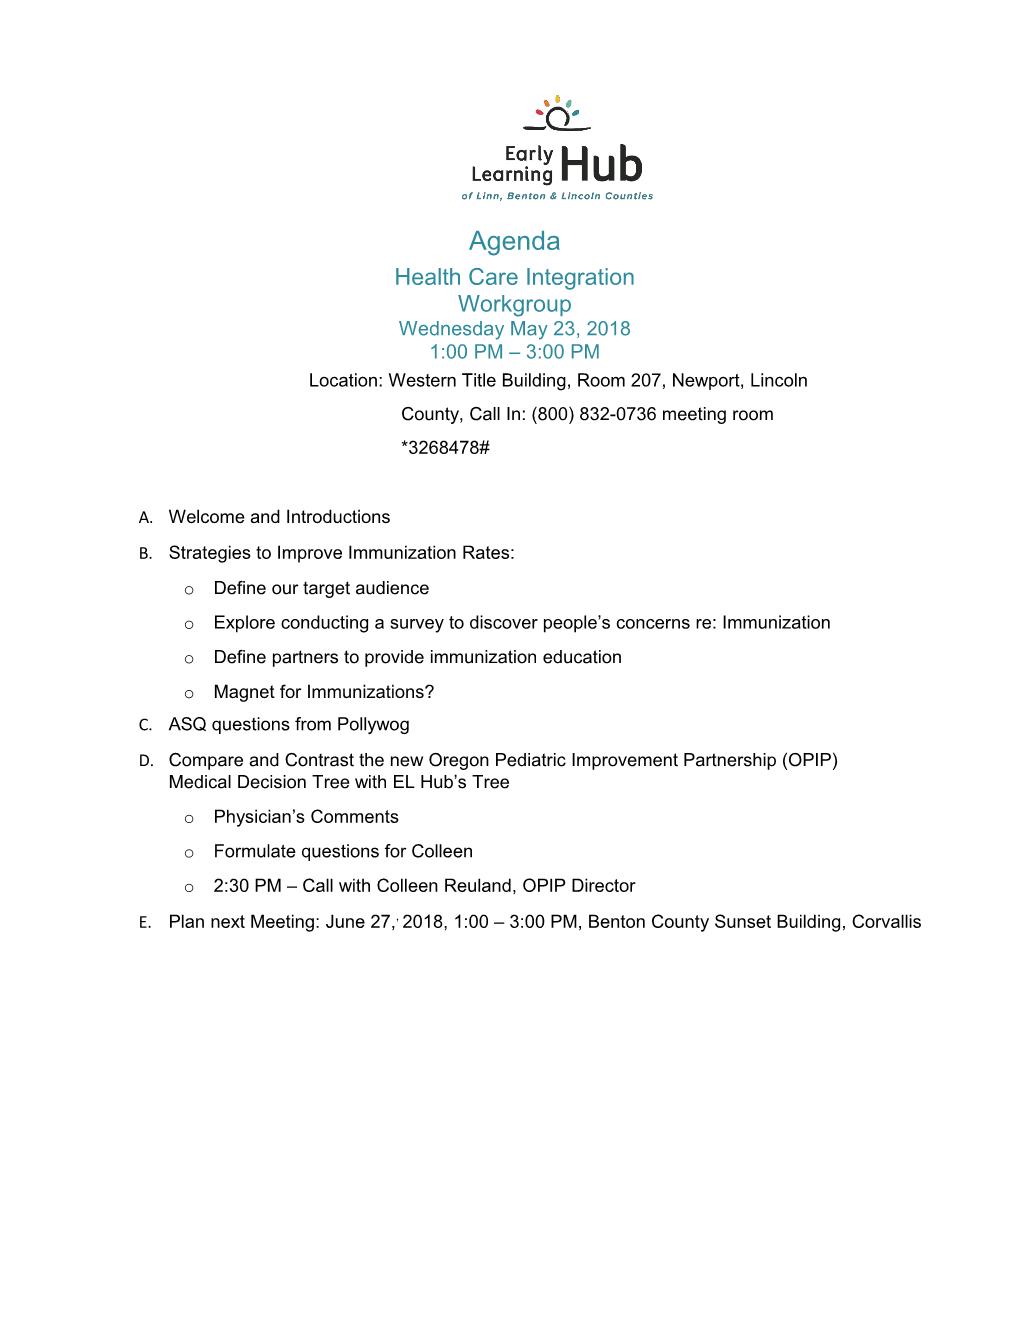 Health Care Integration Workgroup